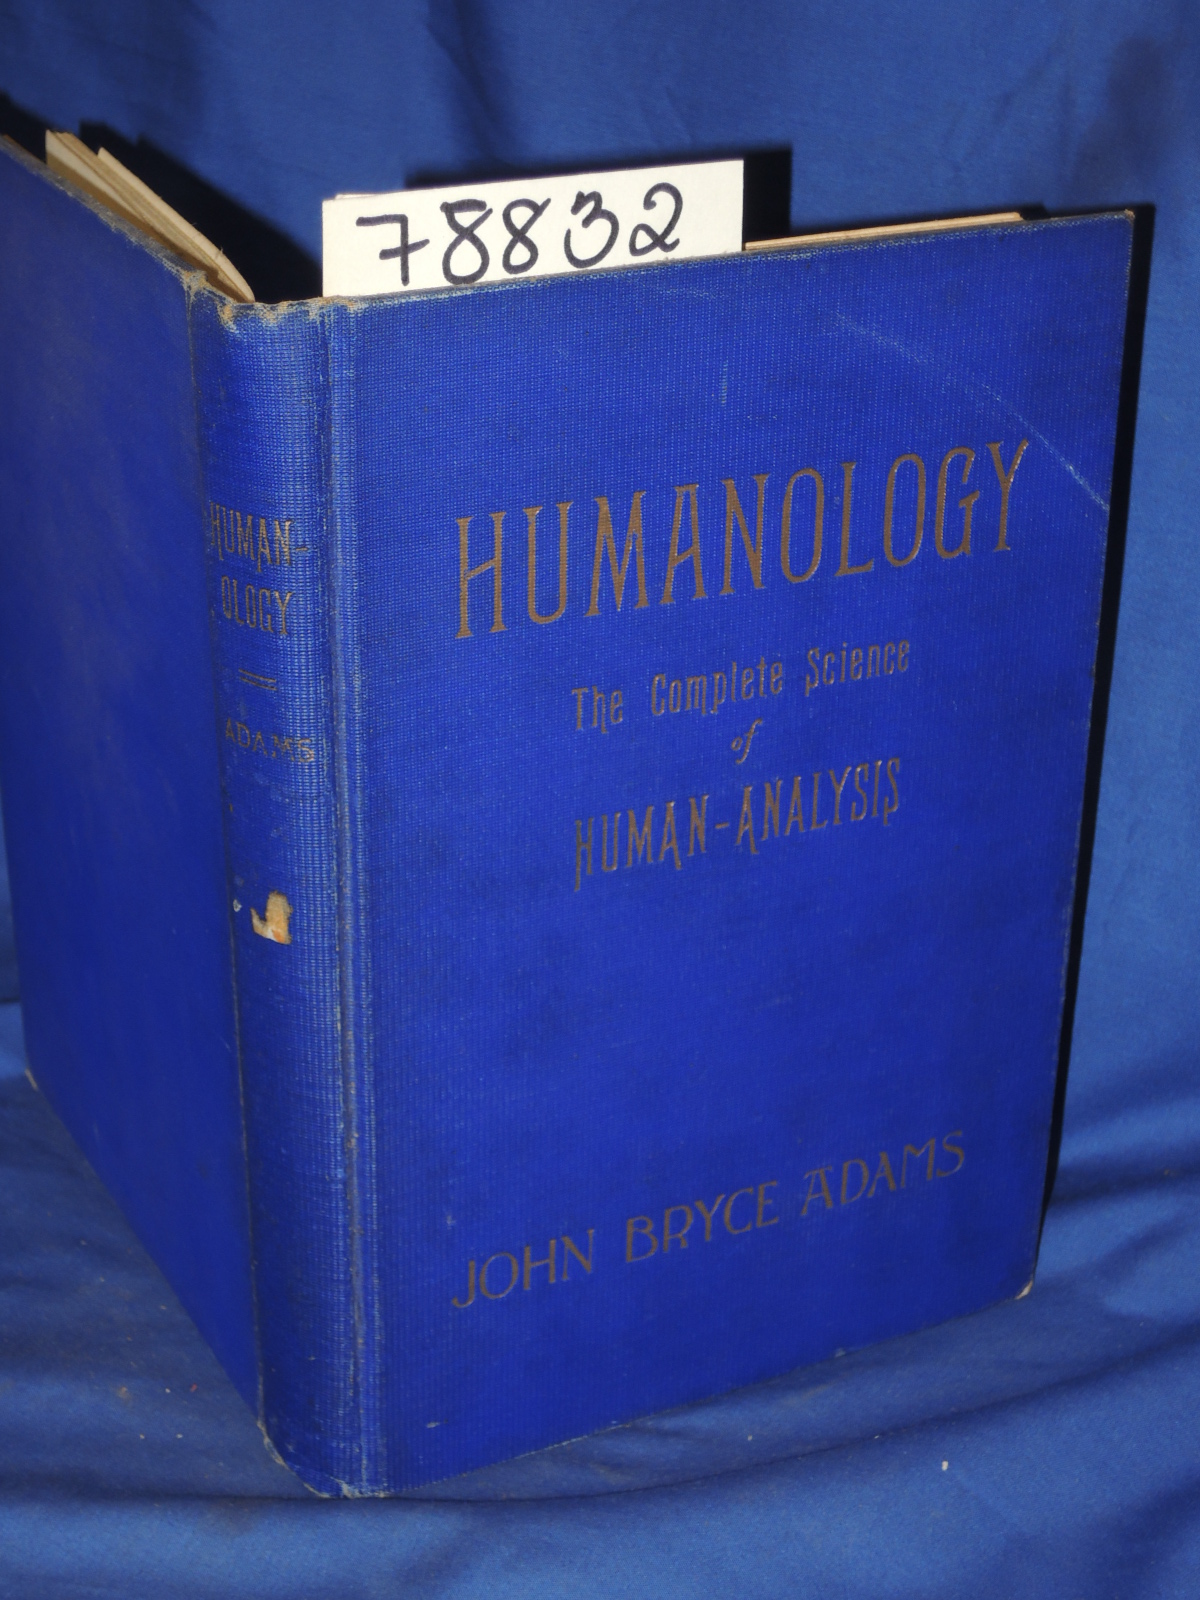 Adams, John Bryce: Humanology. The Complete Science